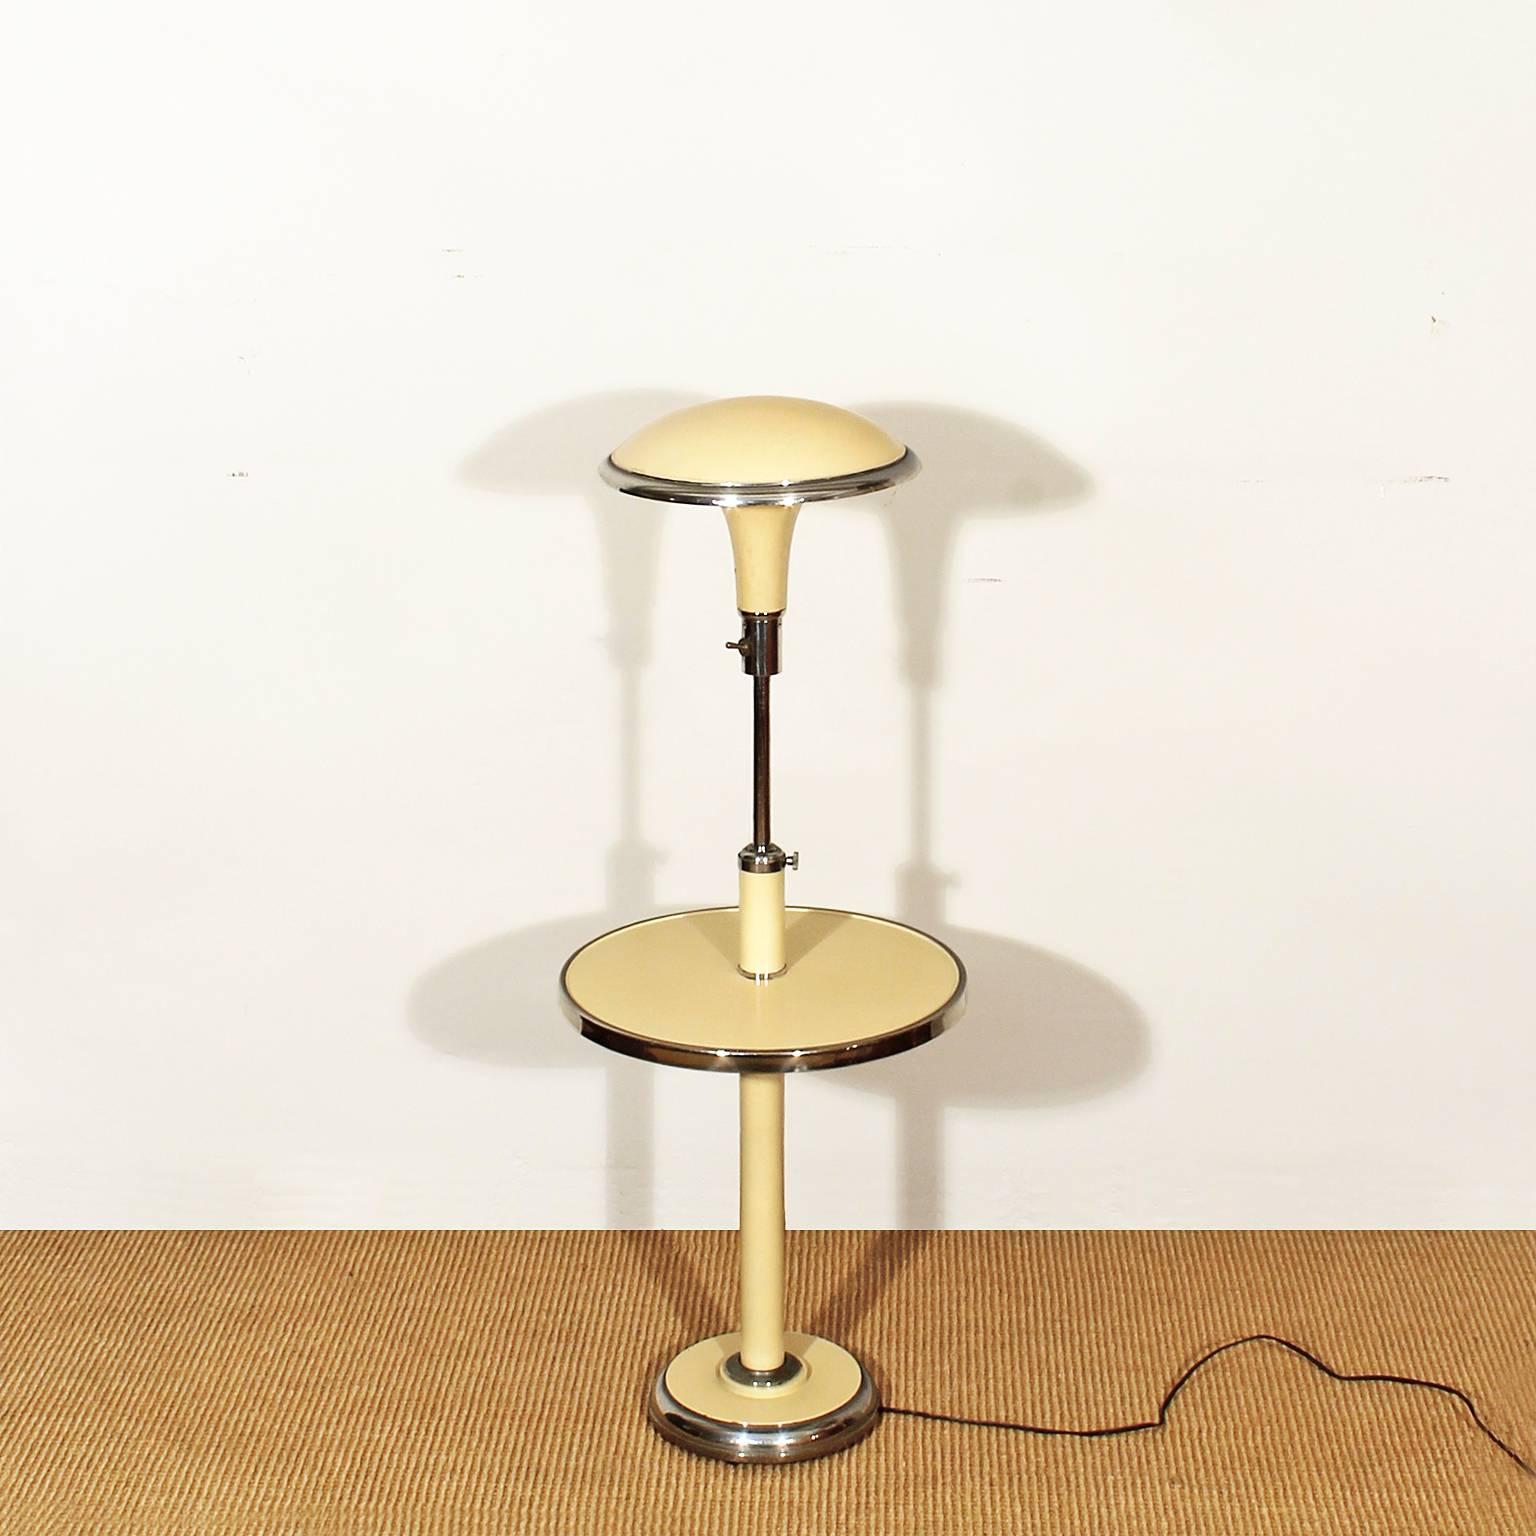 Art Deco floor reading lamp, adjustable height, ivory lacquered sheet metal and chrome plated metal, high quality.
France c. 1930

Maximum height: 124 cm
Minimum height: 106 cm 